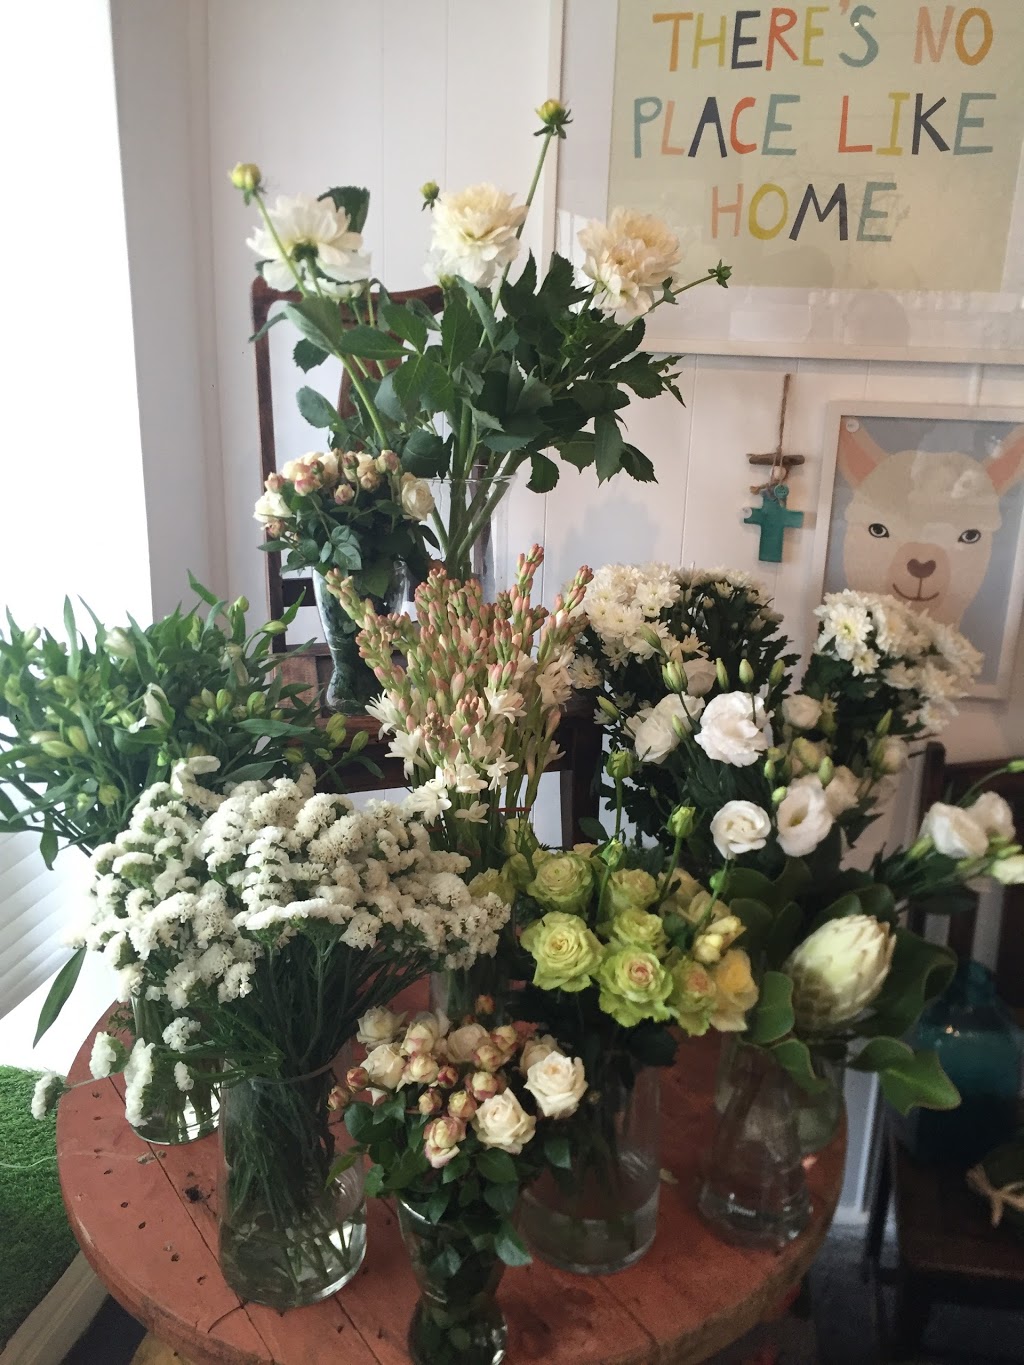 Birch and Willow Florist and Event Stylist | florist | 198 Comur St, Yass NSW 2582, Australia | 0467427719 OR +61 467 427 719